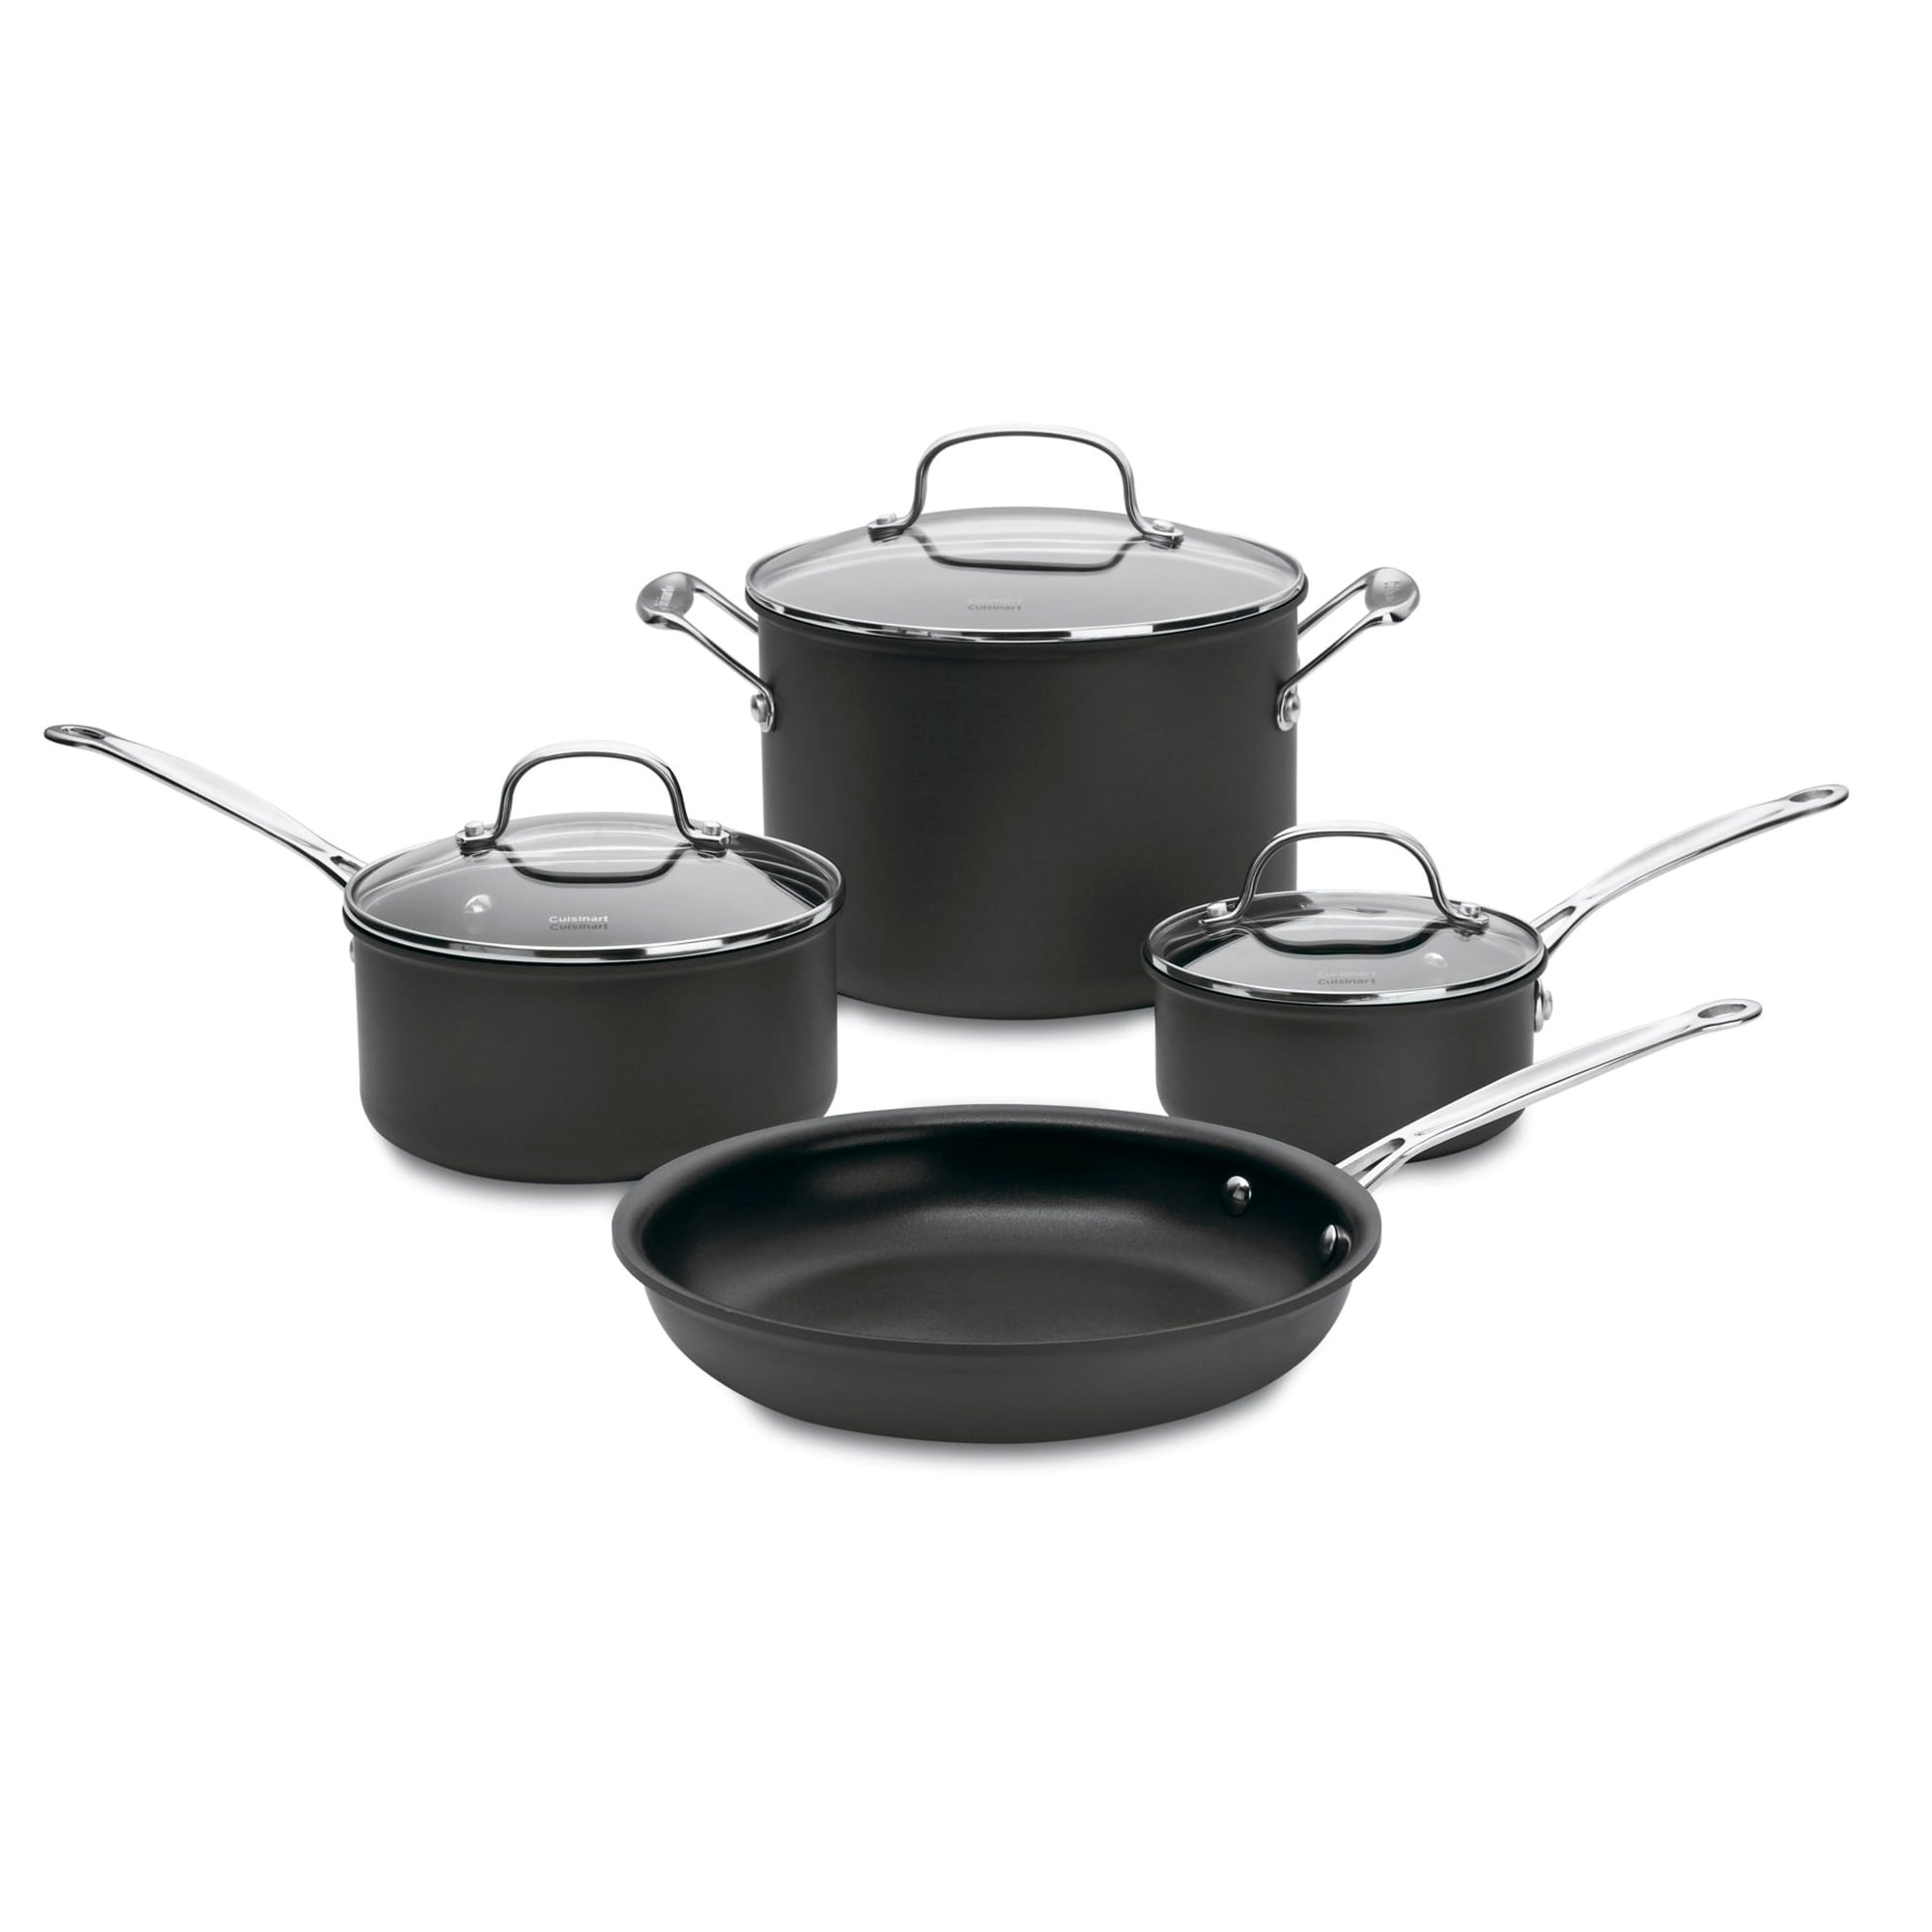 https://ak1.ostkcdn.com/images/products/is/images/direct/593fa7f09051c124aa90811981d743a9c900dc0c/Cuisinart-Chef%27s-Classic%E2%84%A2-Nonstick-Hard-Anodized-7-Piece-Set.jpg